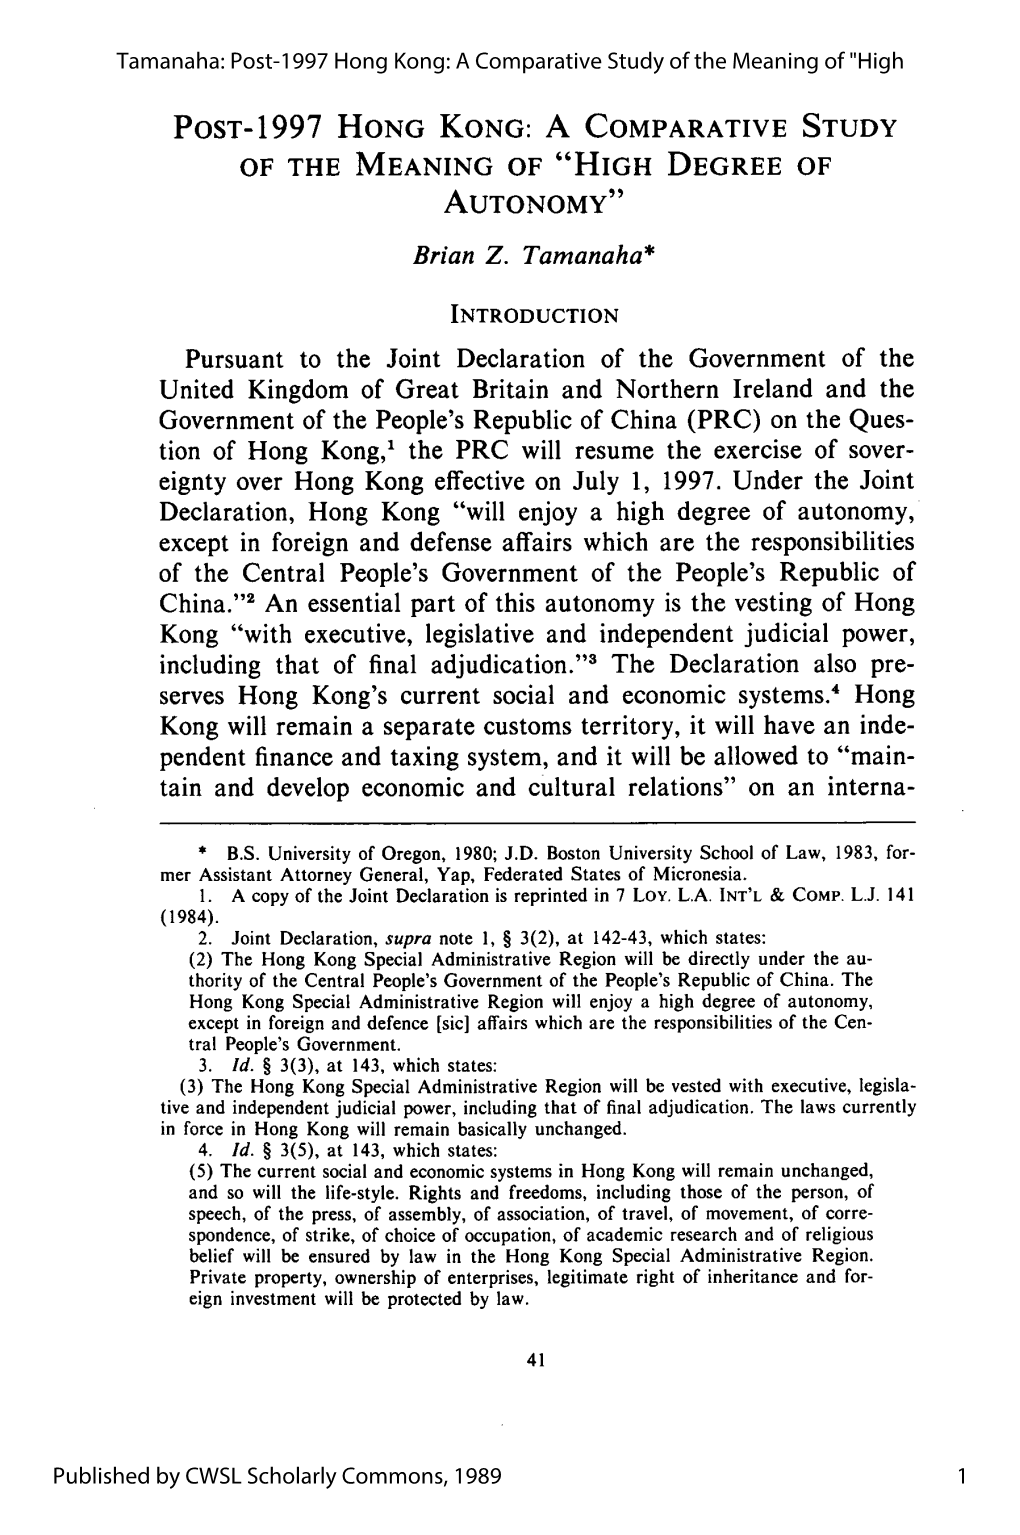 Post-1997 Hong Kong: a Comparative Study of the Meaning of "High